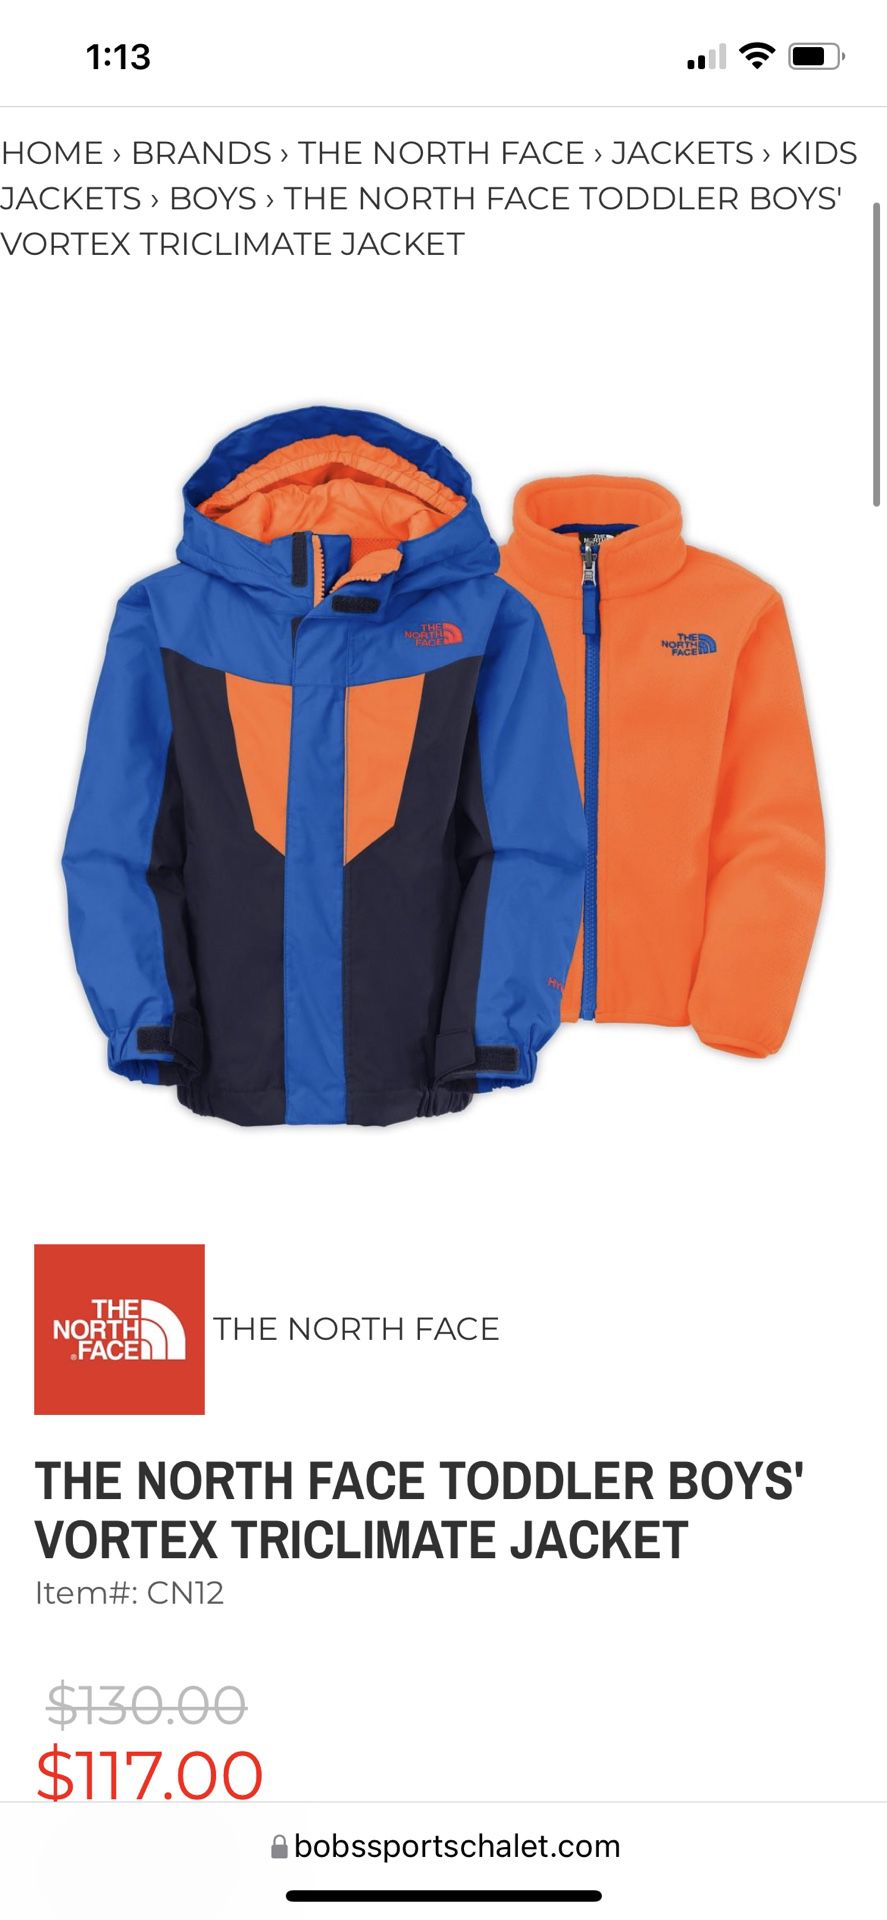 PENDING:The North Face Tri-Climate Vortex 3t Jacket